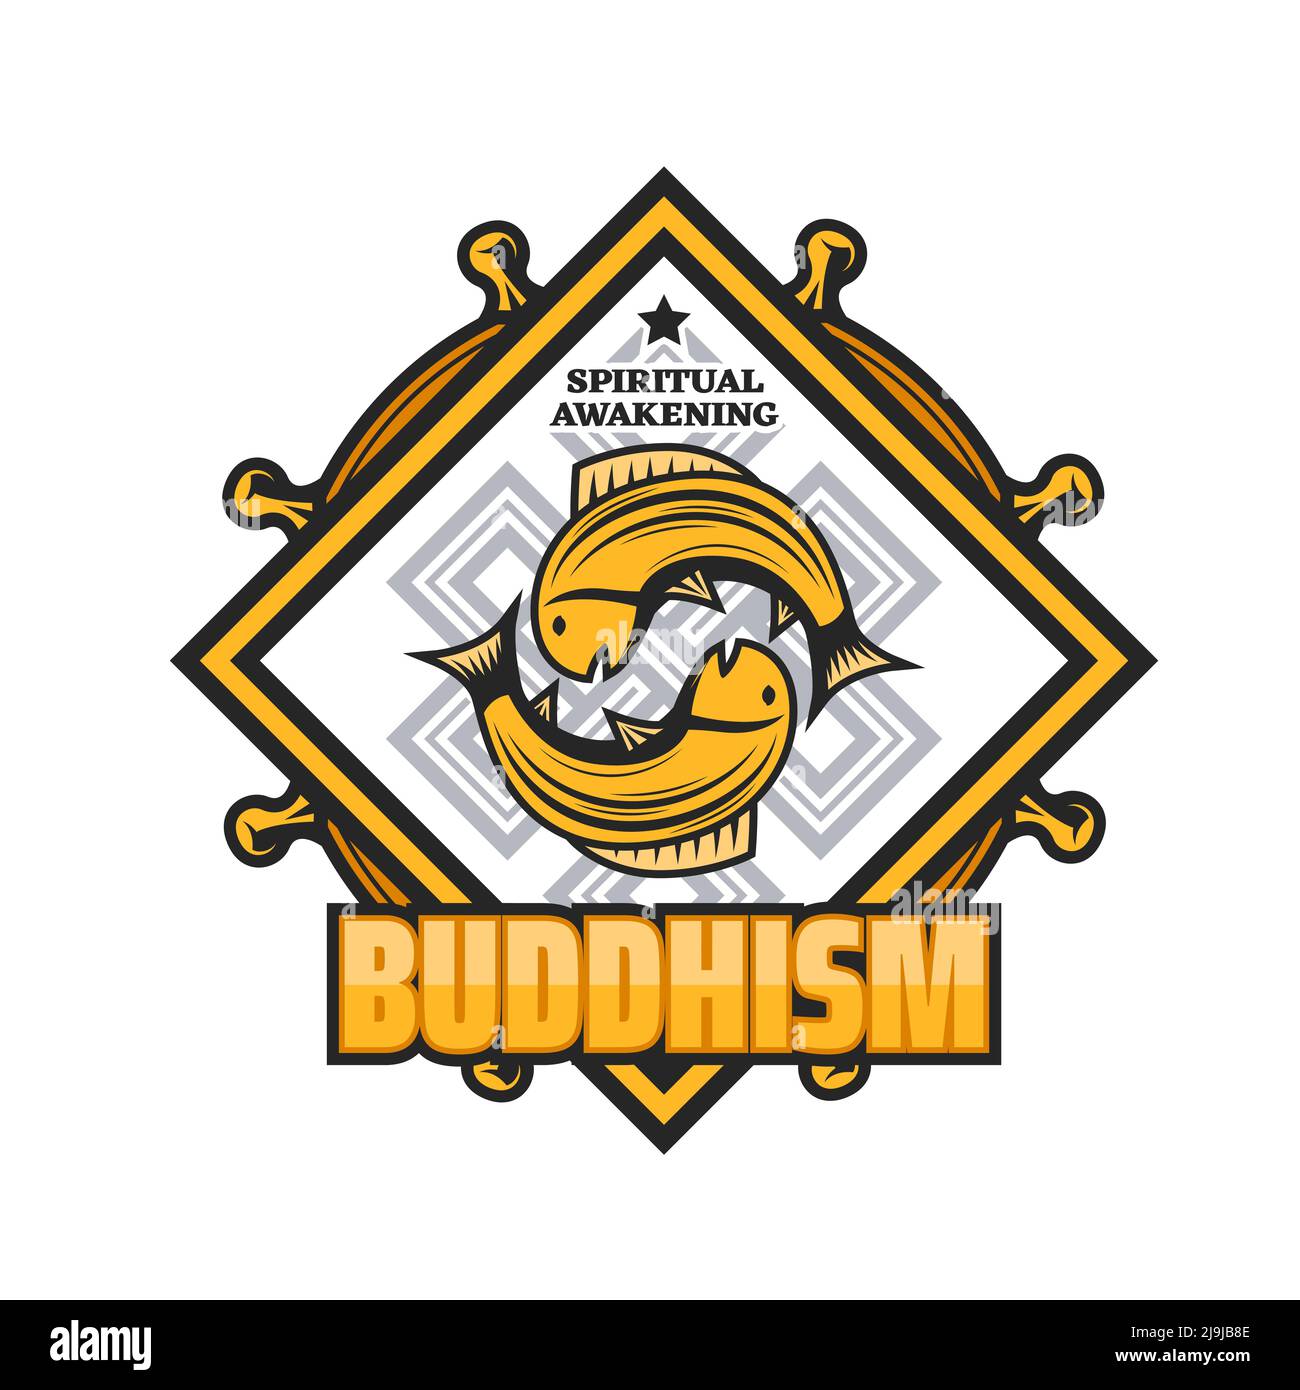 Buddhism religion icon with vector koi carp fish, dharma wheel and endless knot. Isolated sacred symbol of Buddhist or Tibetan monk, Indian religious signs for meditation or spiritual practice icon Stock Vector